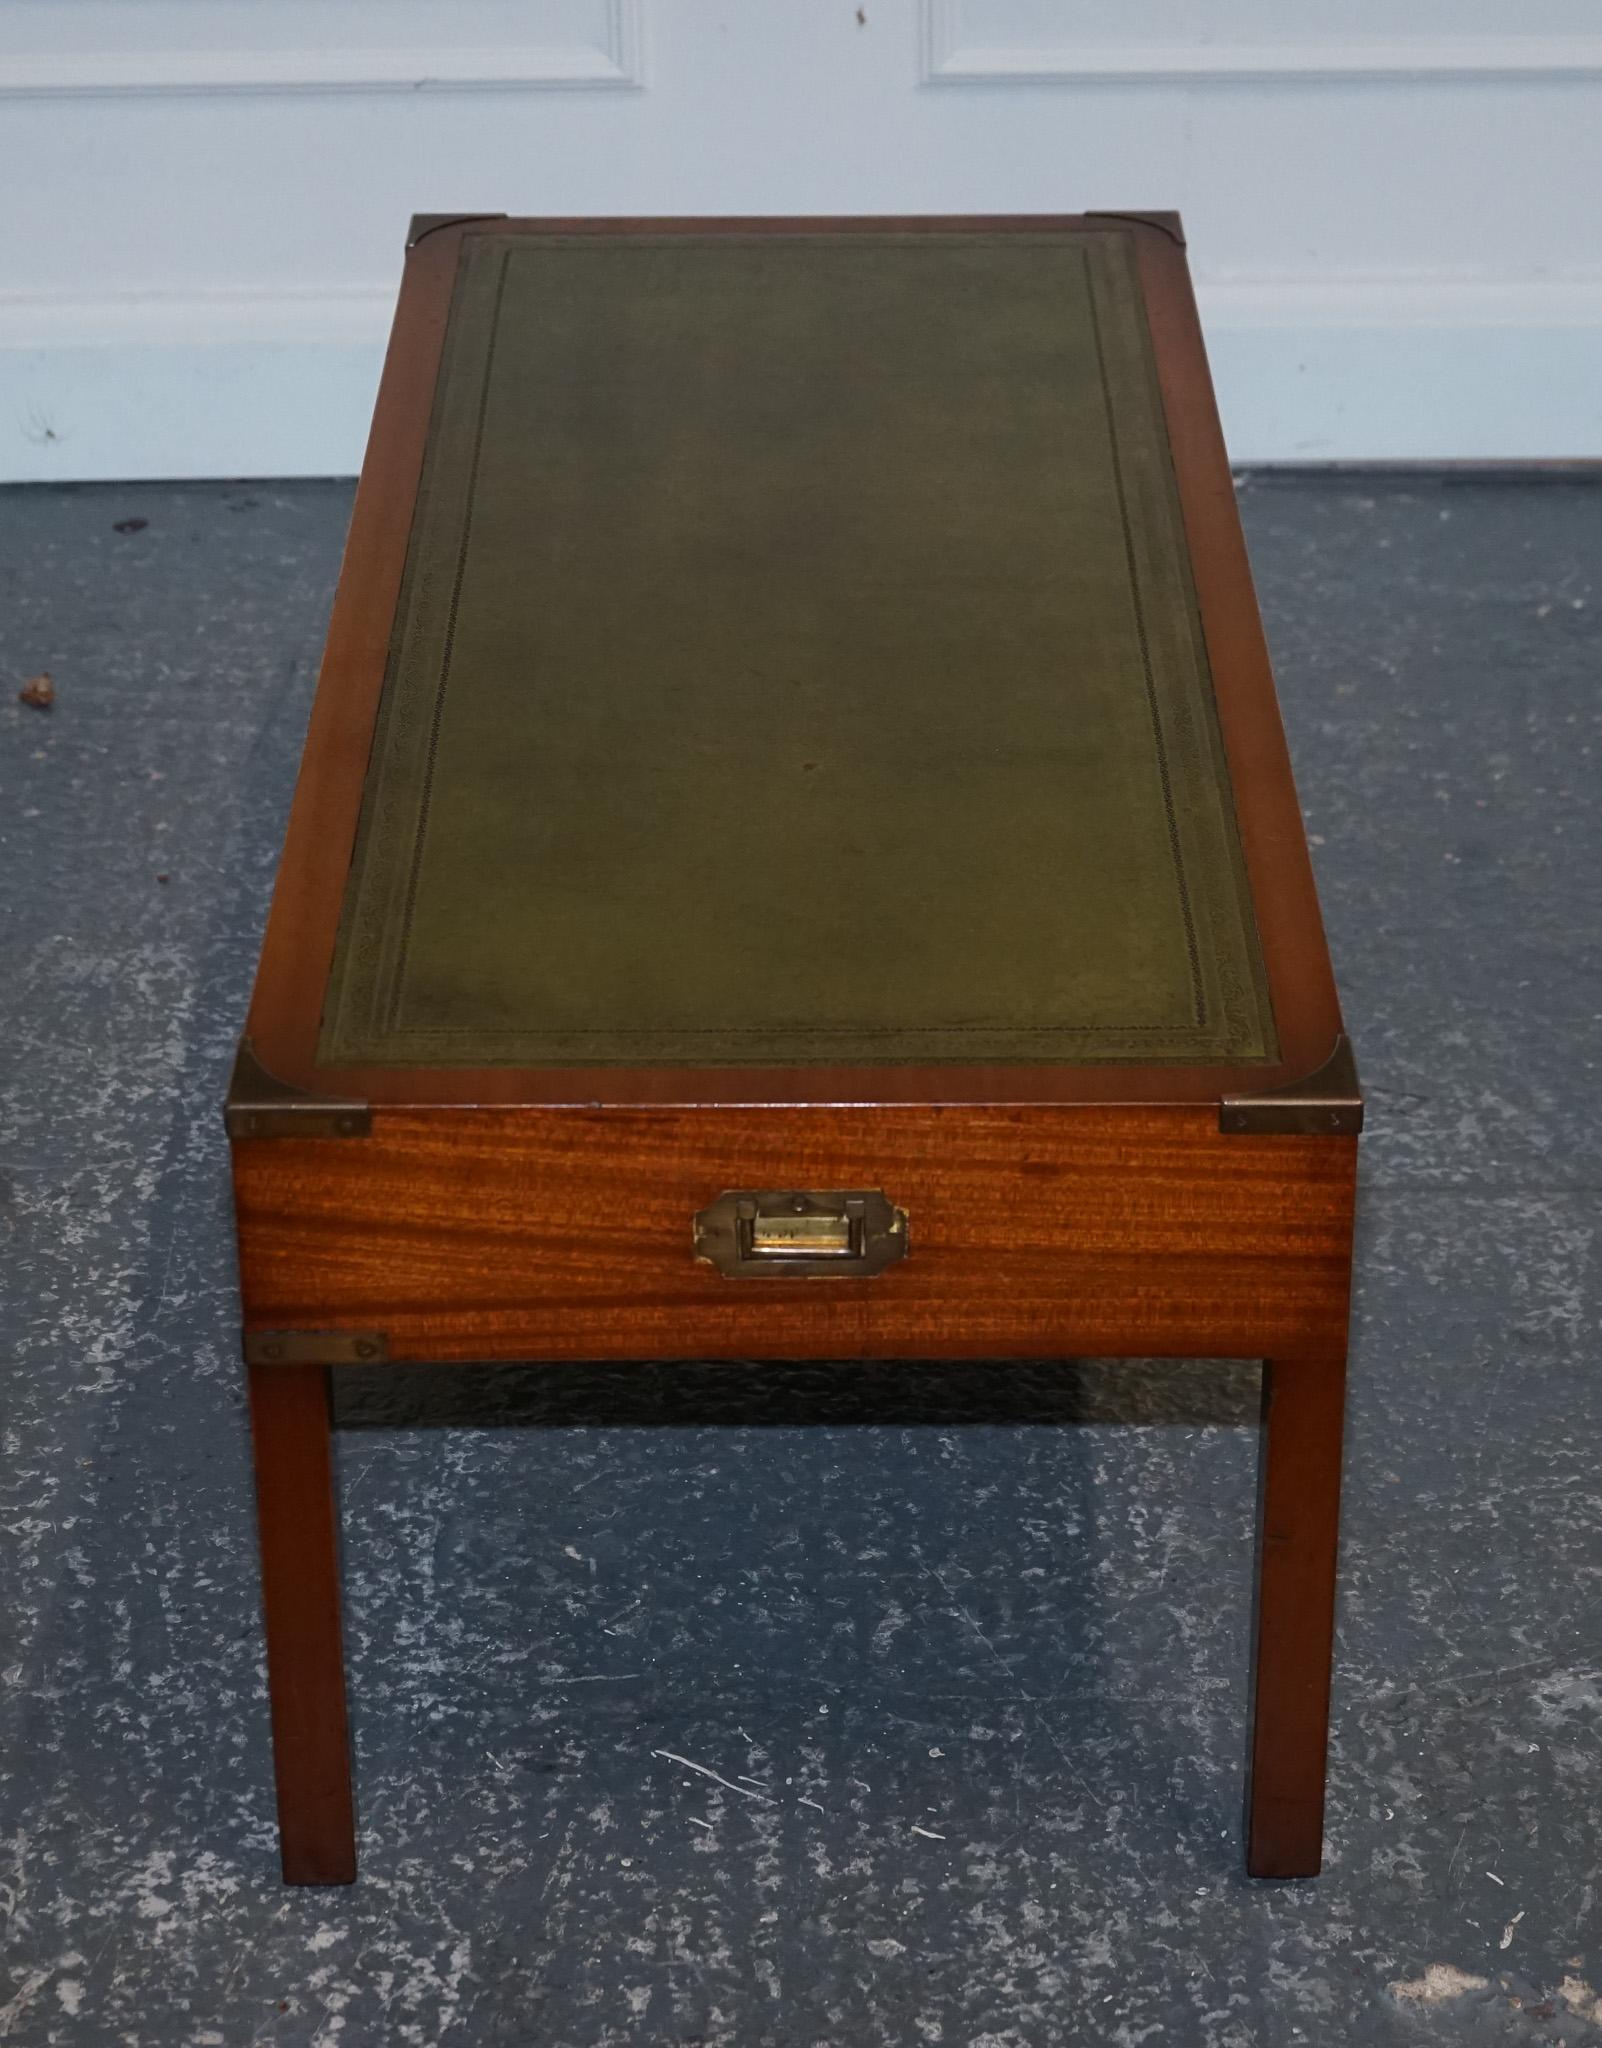 BEVAN FUNNELL COFFEE TABLE WITH TWO SiDE UNDER TABLES GREEN LEATHER TOP In Good Condition For Sale In Pulborough, GB